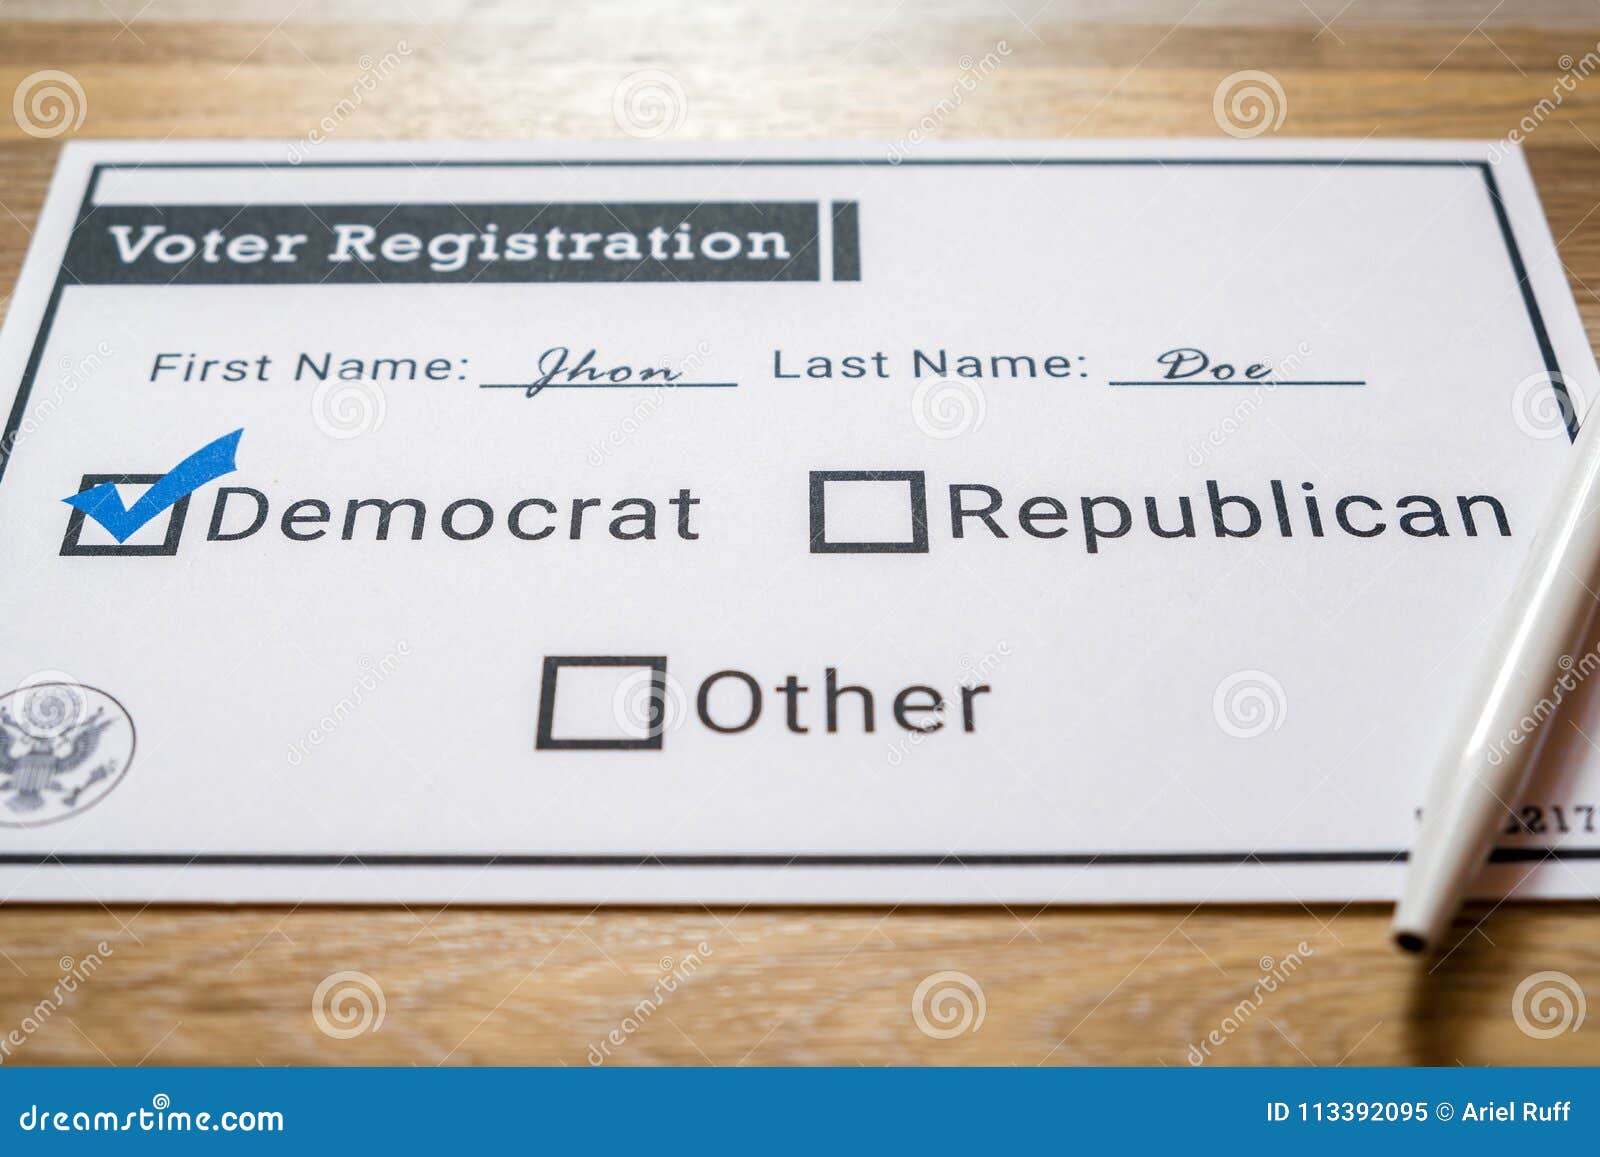 voter registration card with democratic party selected - close up